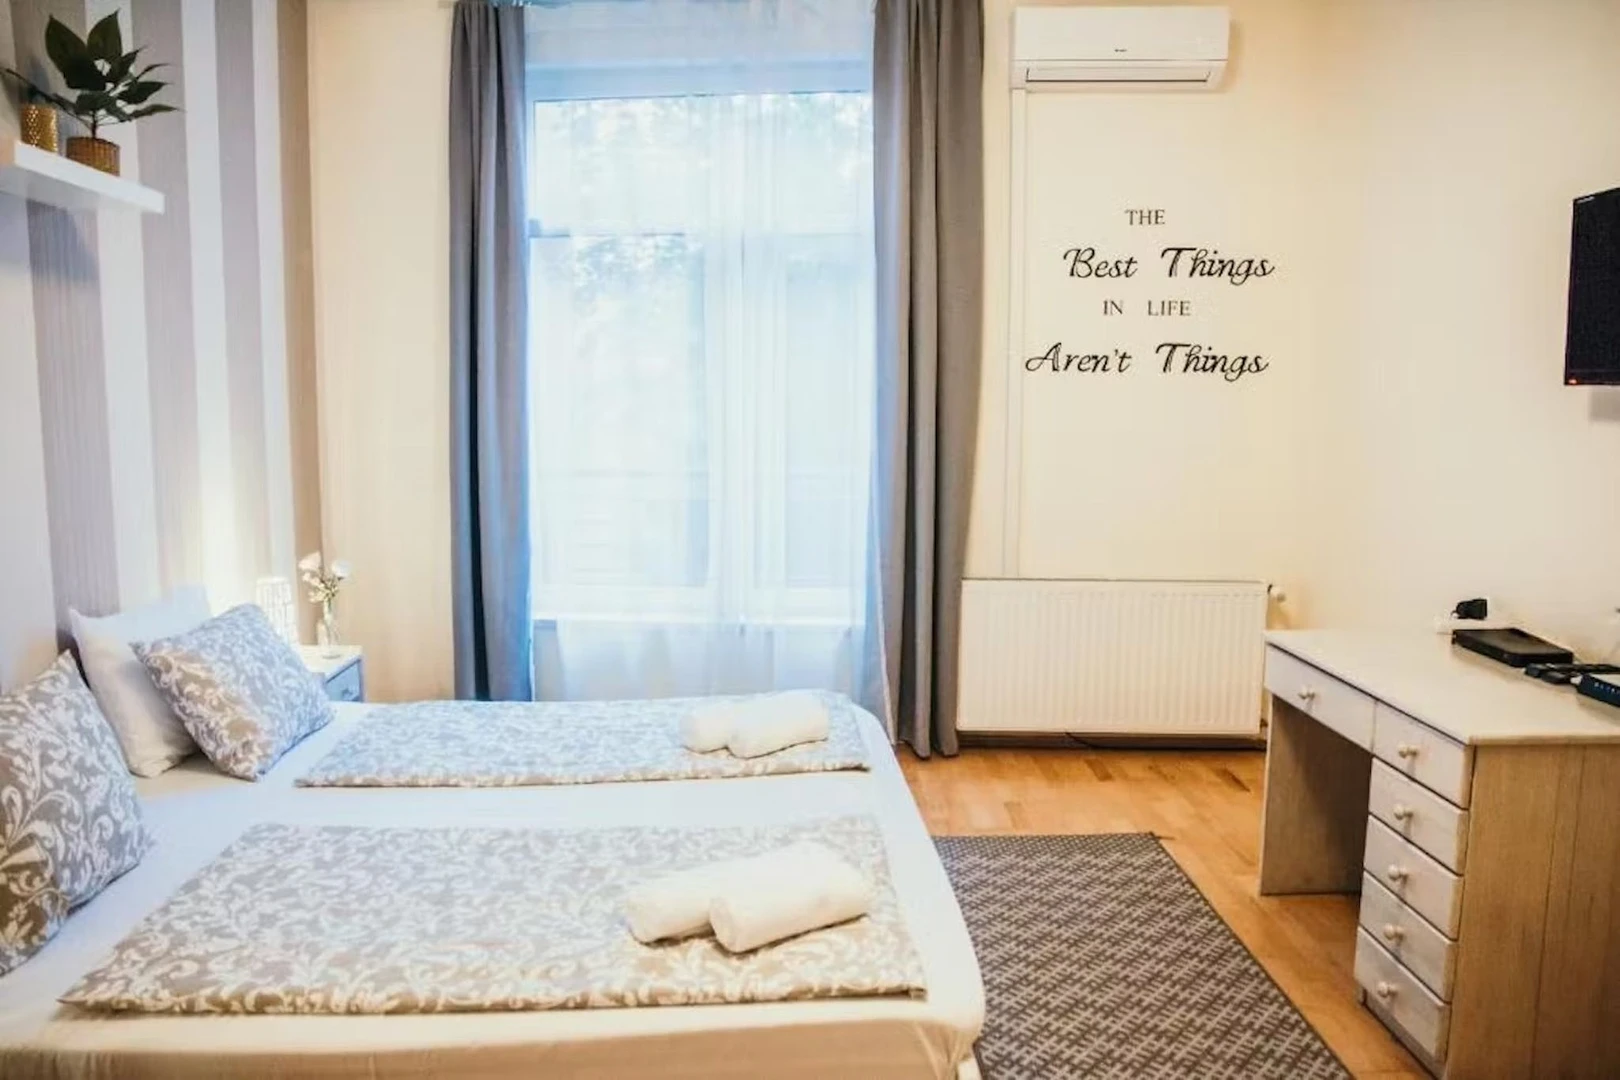 Room for rent in a shared flat in budapest